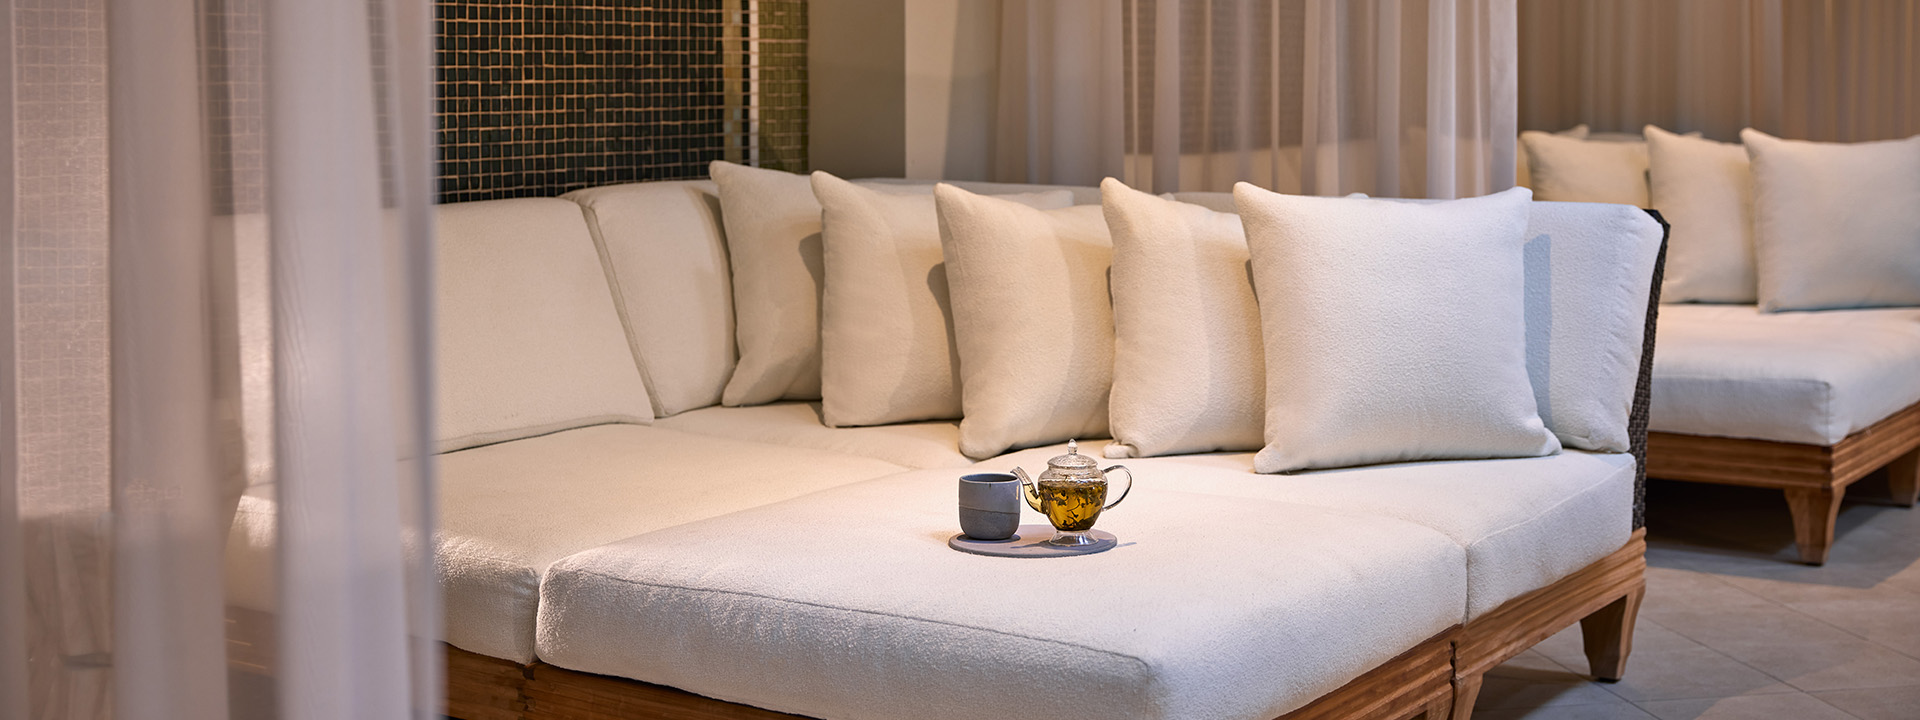 A large sectional couch at a spa. There is a tea cup and a clear teapot with tea inside sitting on one of the cushions.